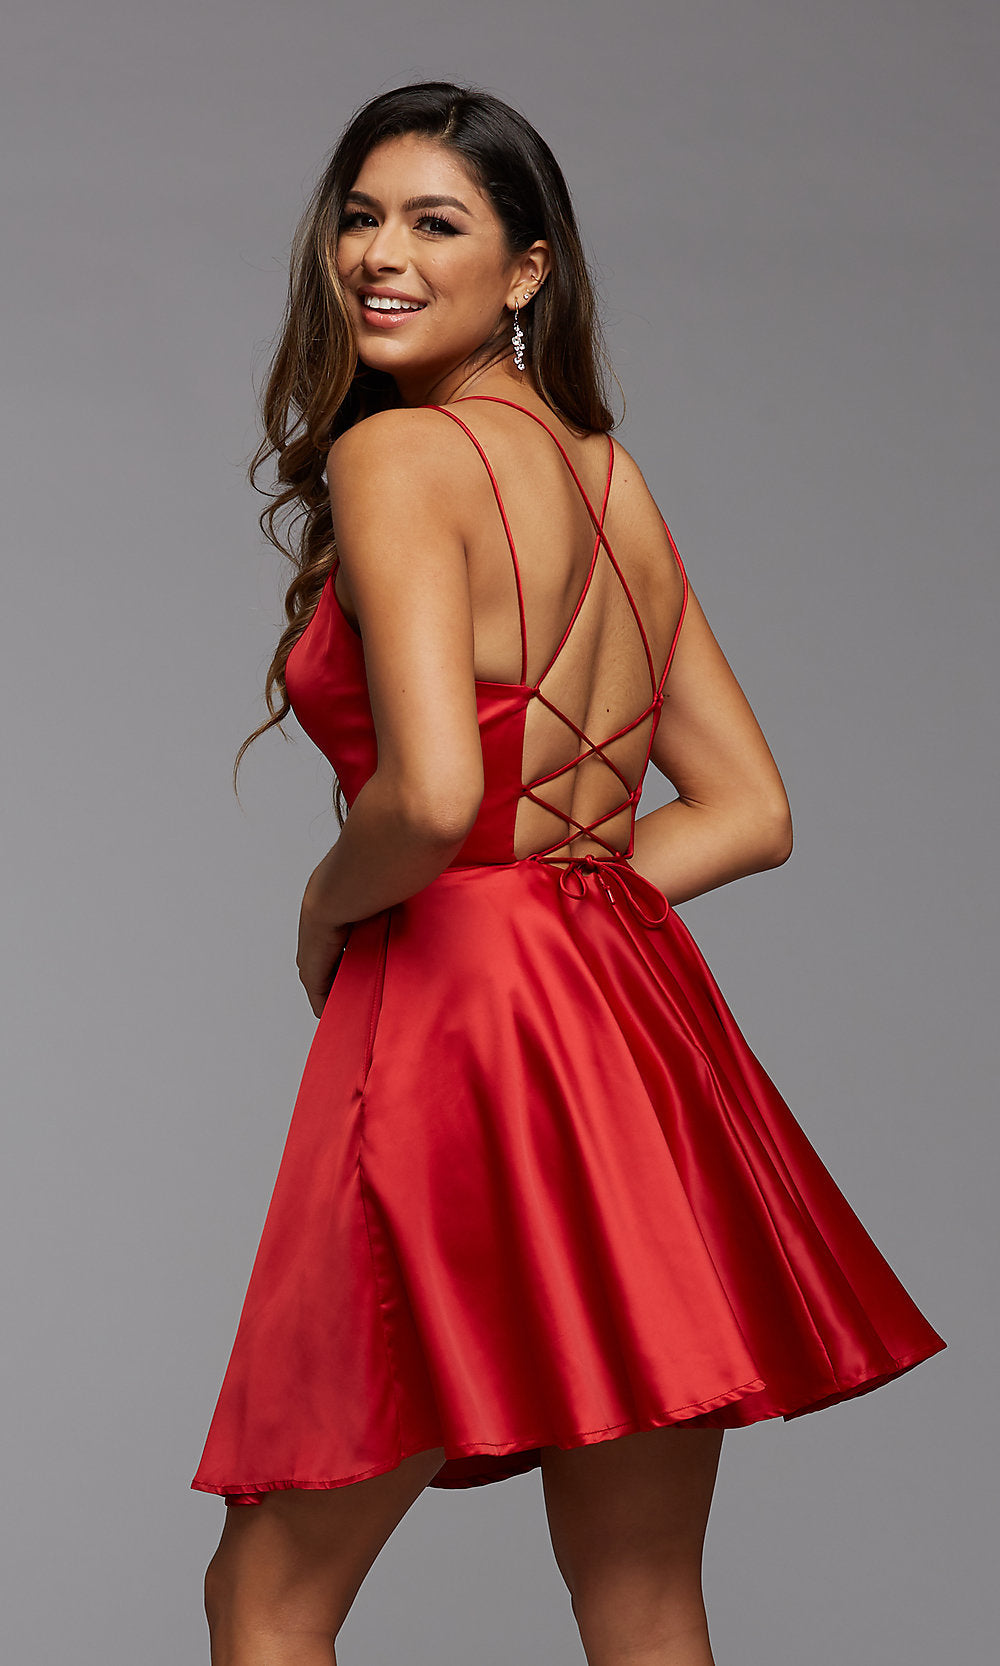  Strappy-Back Short Homecoming Dress with Pockets